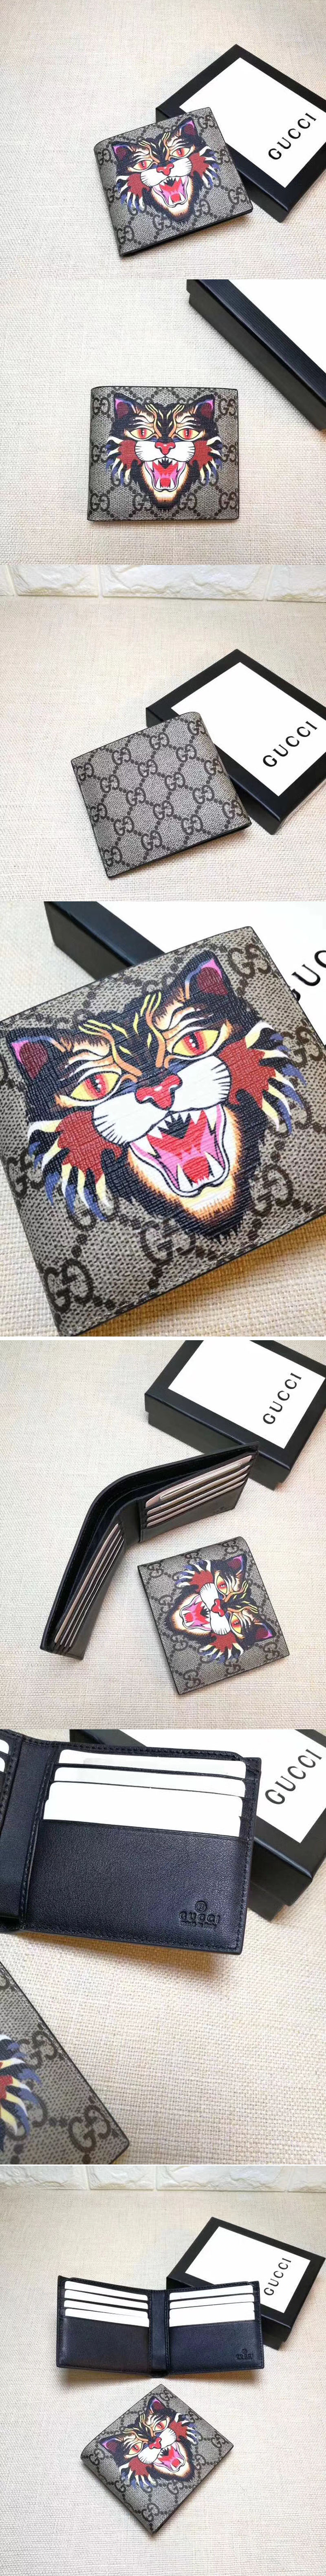 Replica Gucci 451268 Angry Cat print GG Supreme wallet